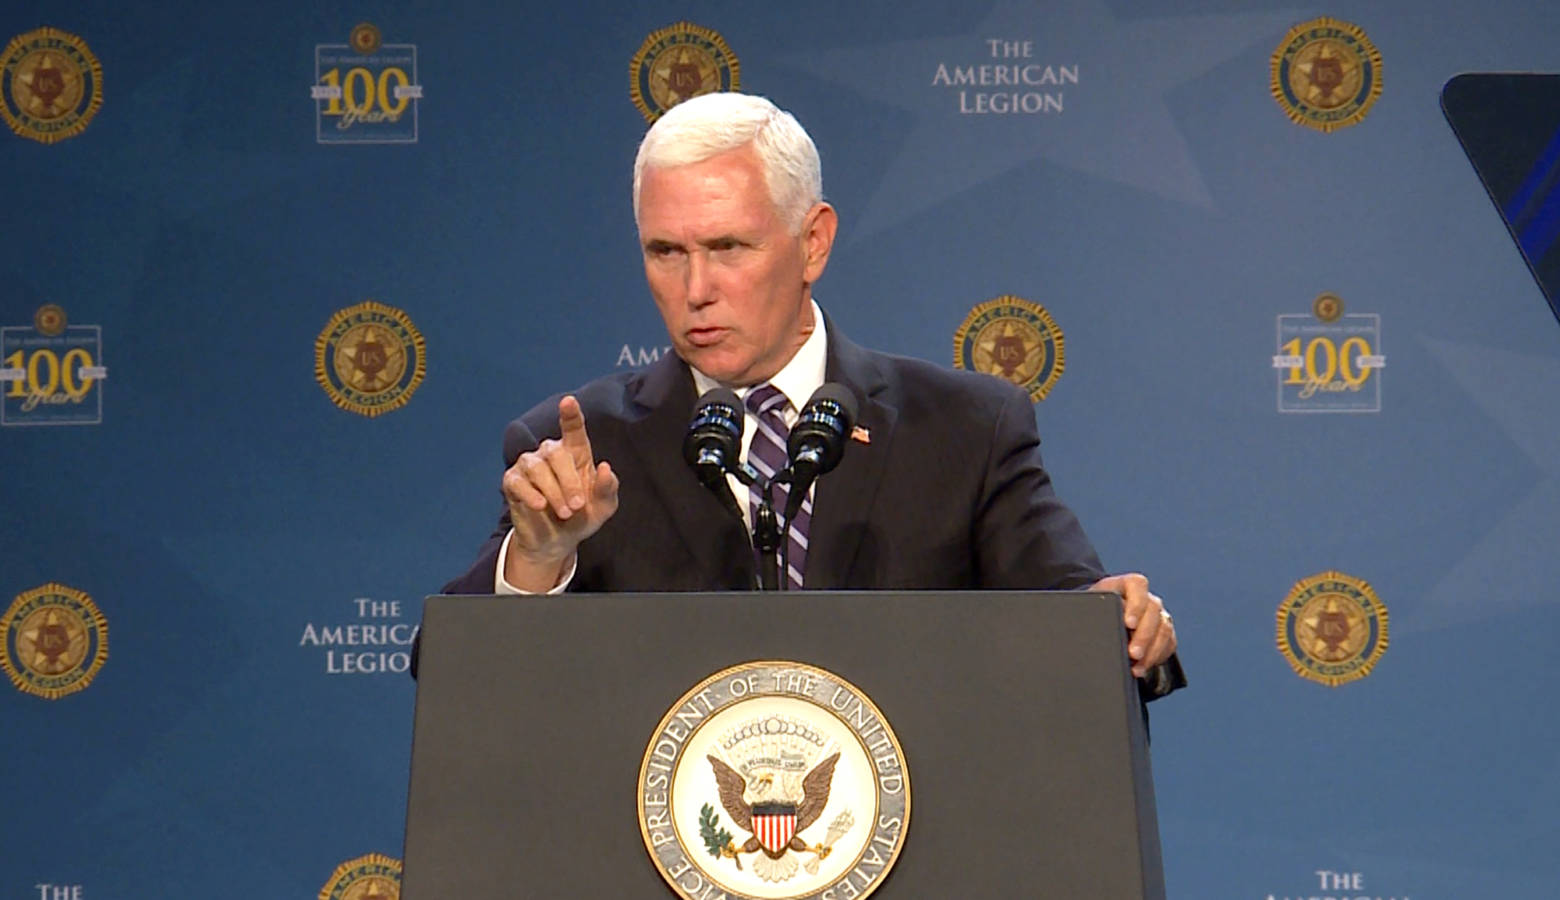 Vice President Mike Pence spoke to hundreds in Indianapolis at the American Legion's national convention. (Lauren Chapman/IPB News)